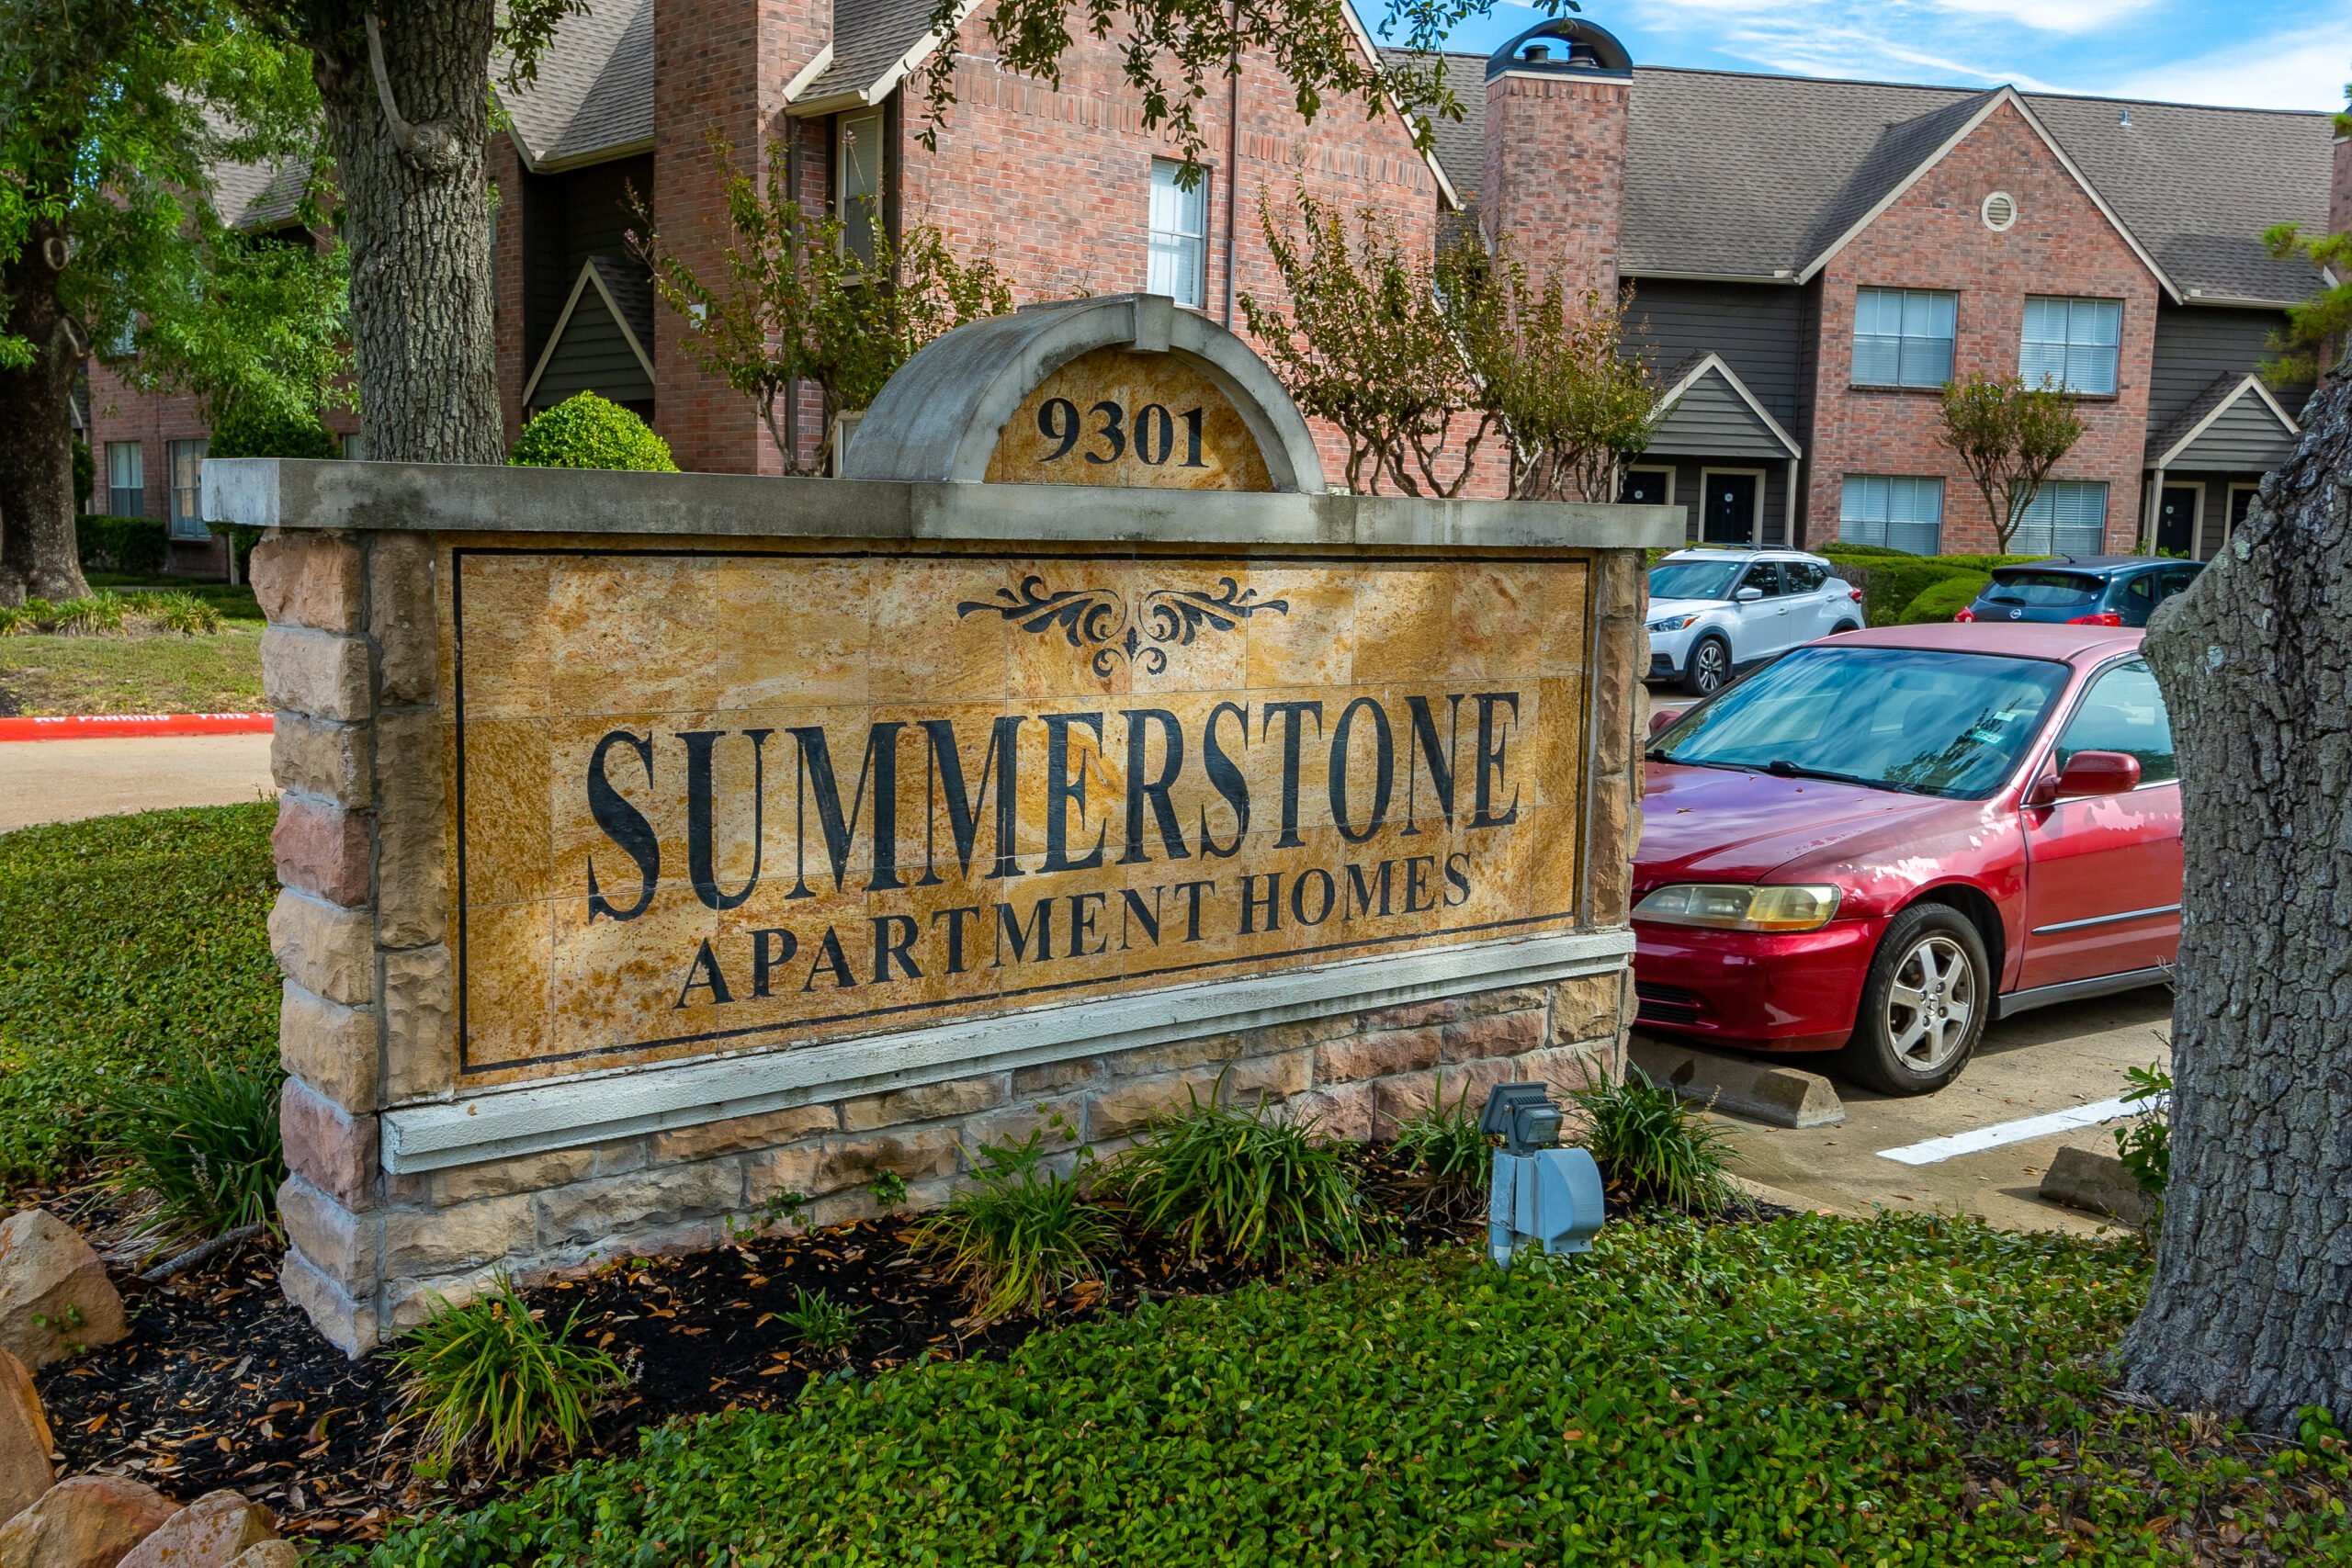 Summerstone Apartment Homes